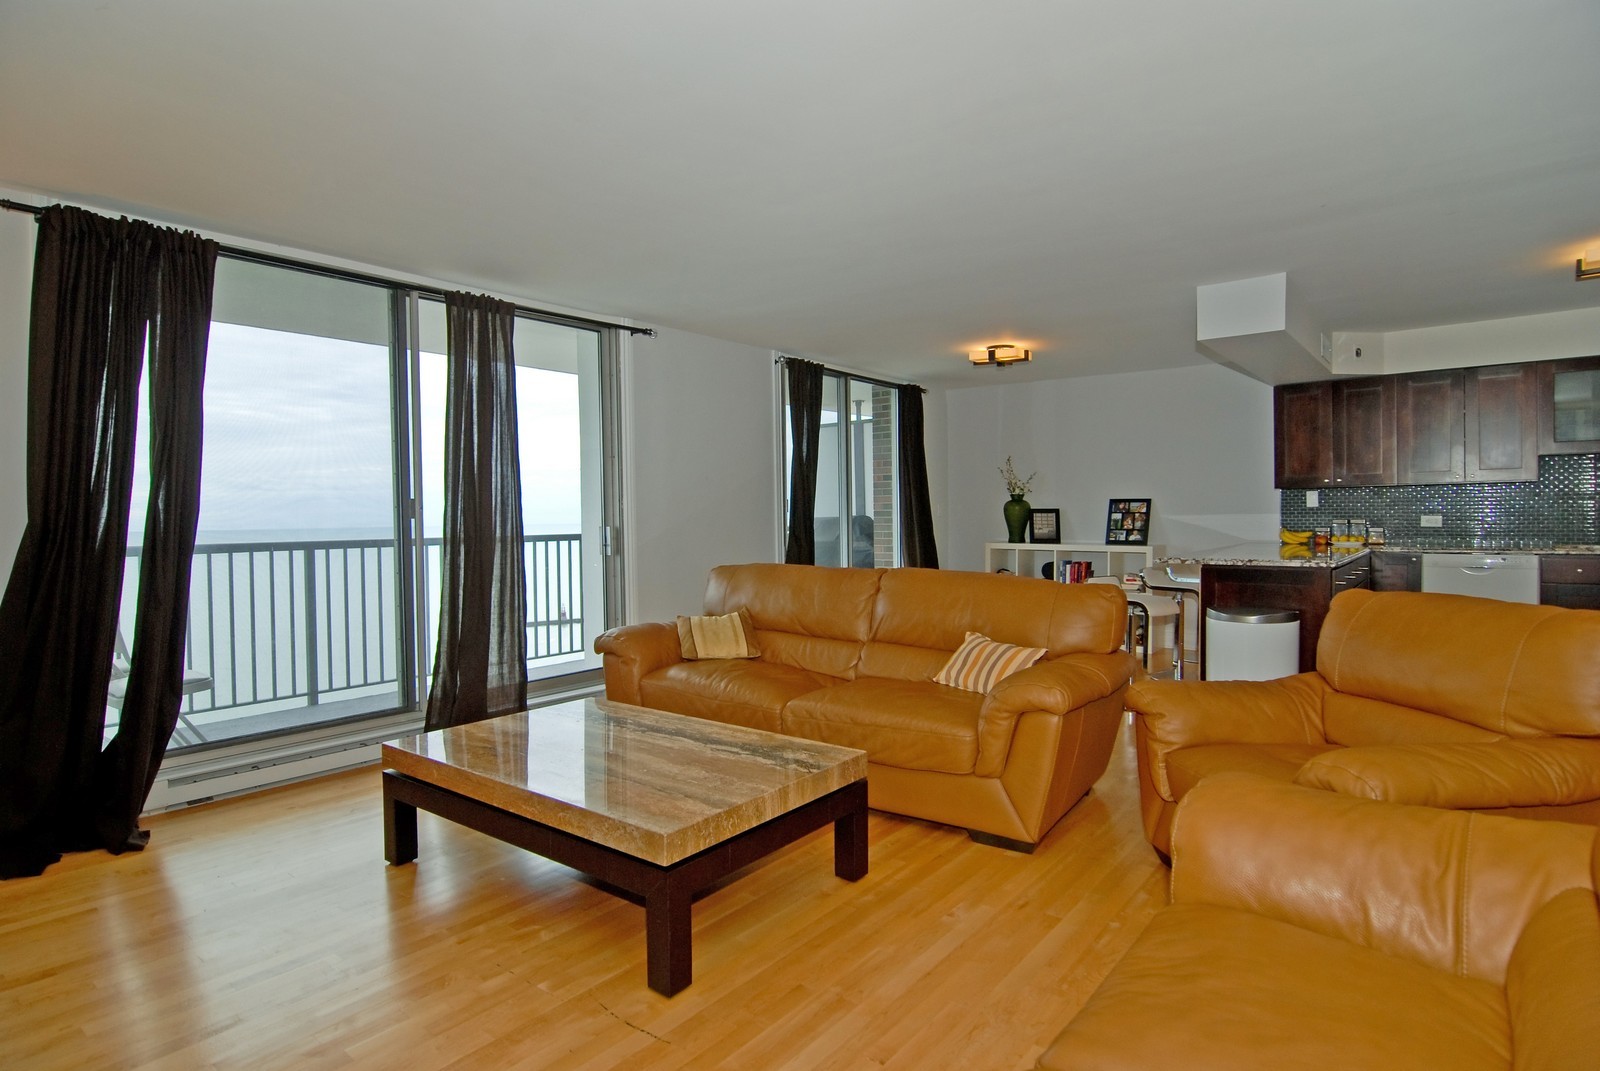 5855 N Sheridan Rd Unit 22b Chicago Il Virtual Tour Coldwell Banker Residential Il Lakeview